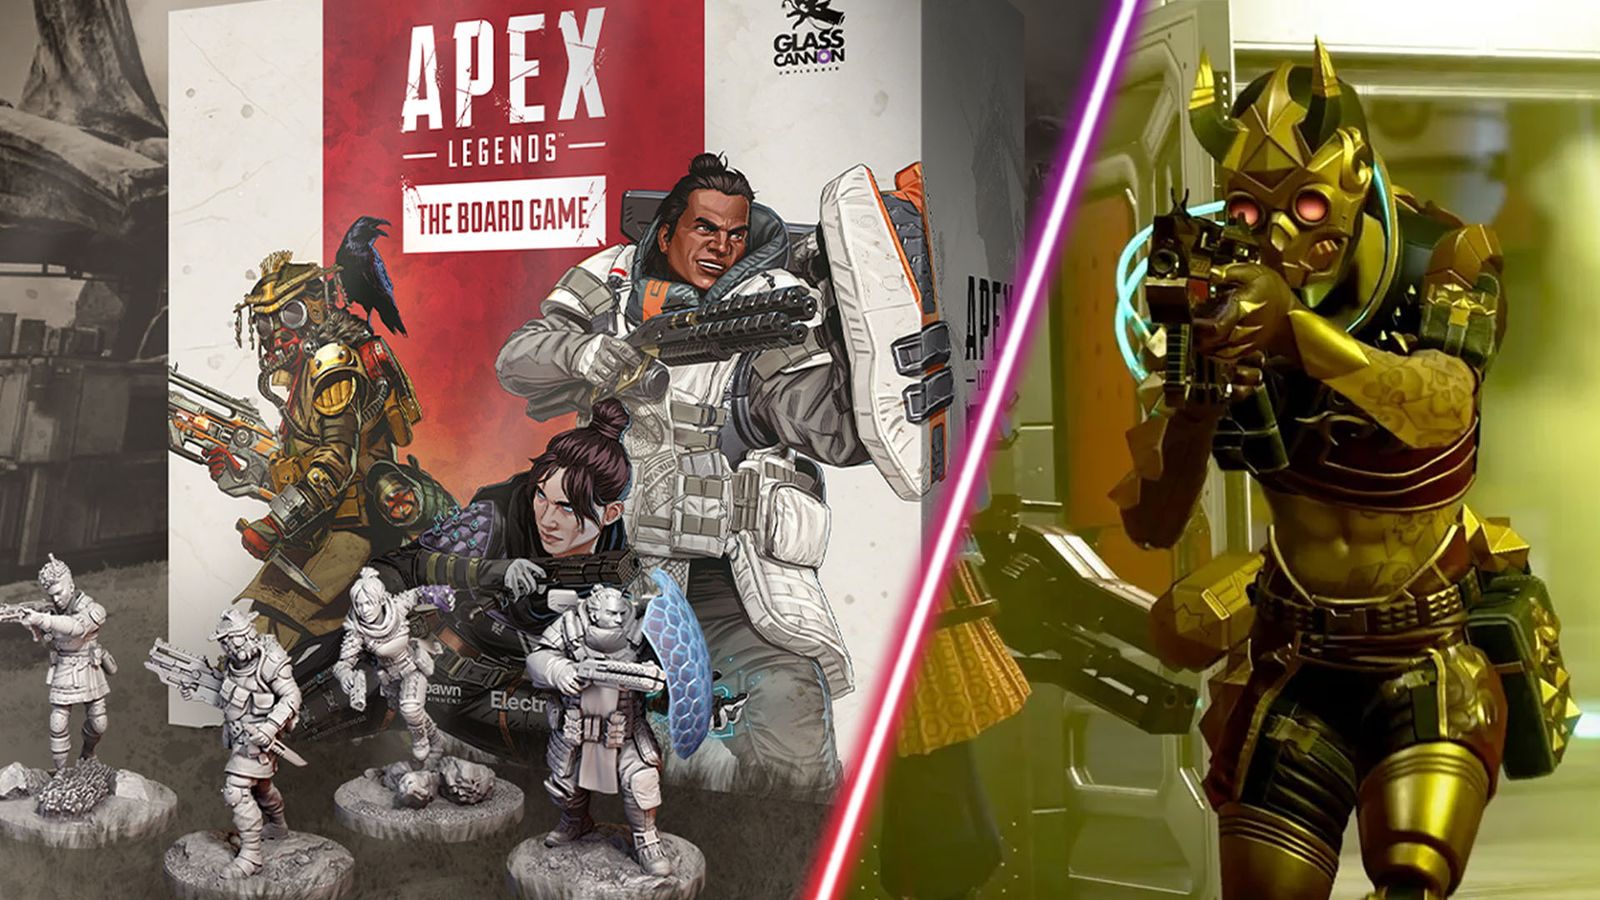 Screenshot of Apex Legends board game and miniature figures and Apex Legends player holding an SMG